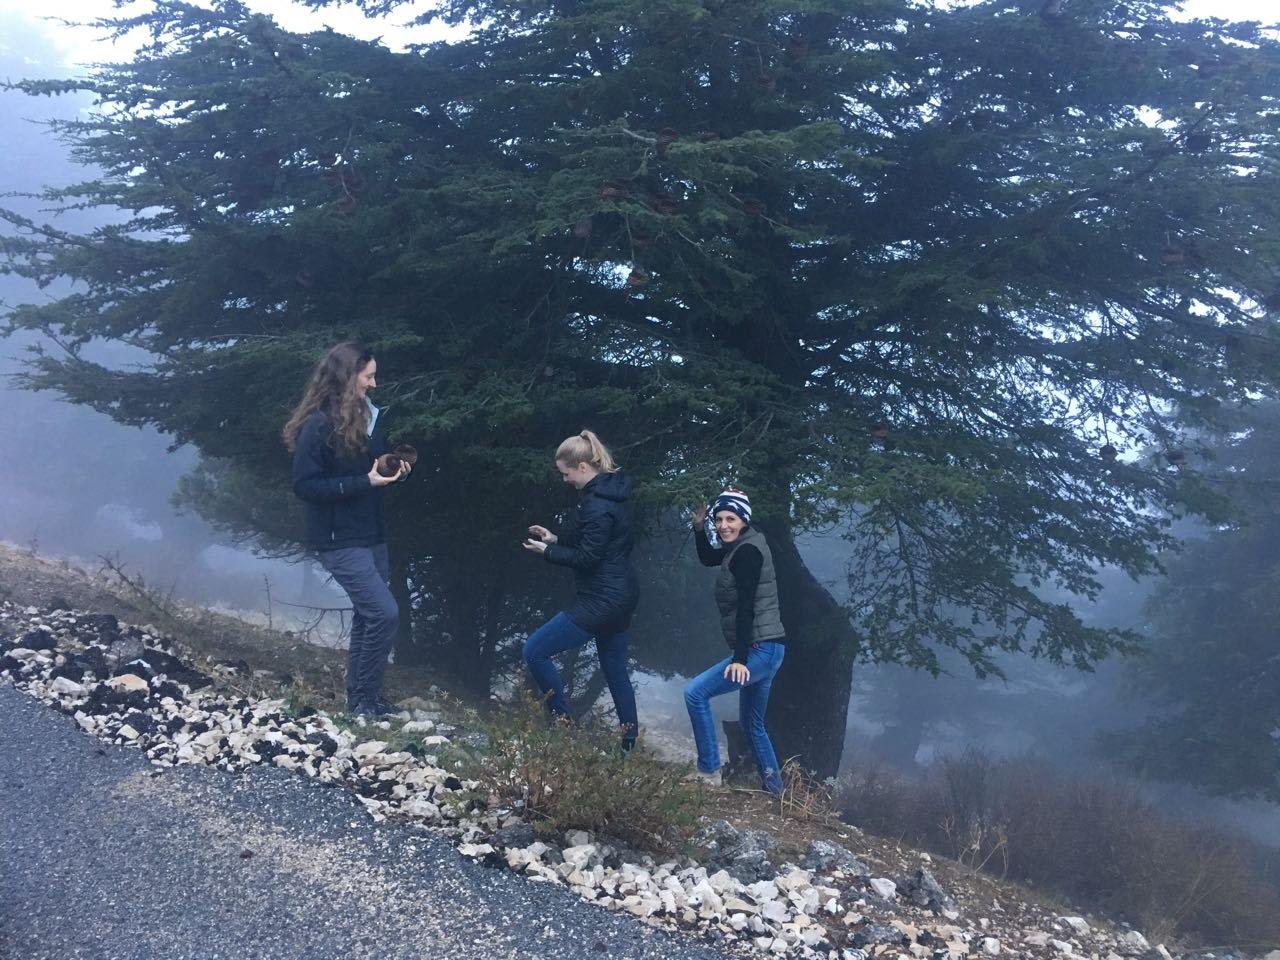 Exploring Lebanon’s cedar forests, which have vanished over the years as the result of logging, invasive species and urbanization. (Photo by Rhea Kahale) 